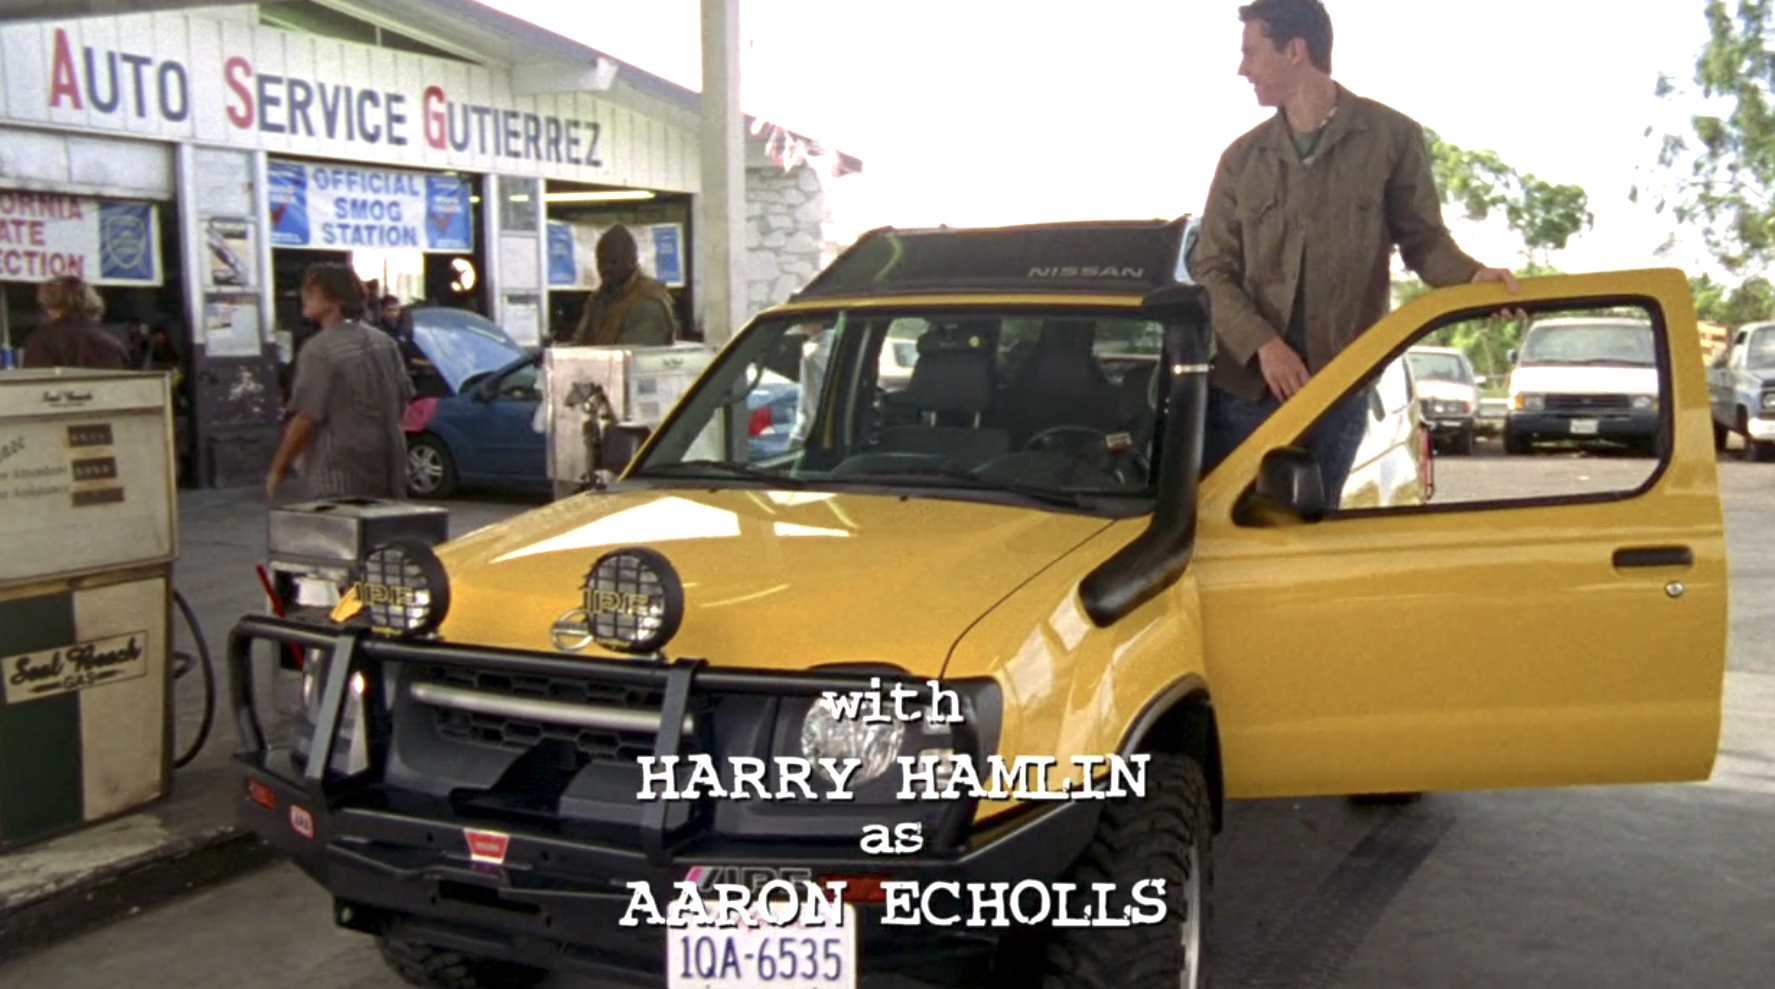 A screenshot from S1E6 of Veronica Mars. Logan has pulled his yellow SUV into a gas station. He's standing on the inside of the car, his hand on the open driver's side door, looking at his friends who are walking into the gas station.